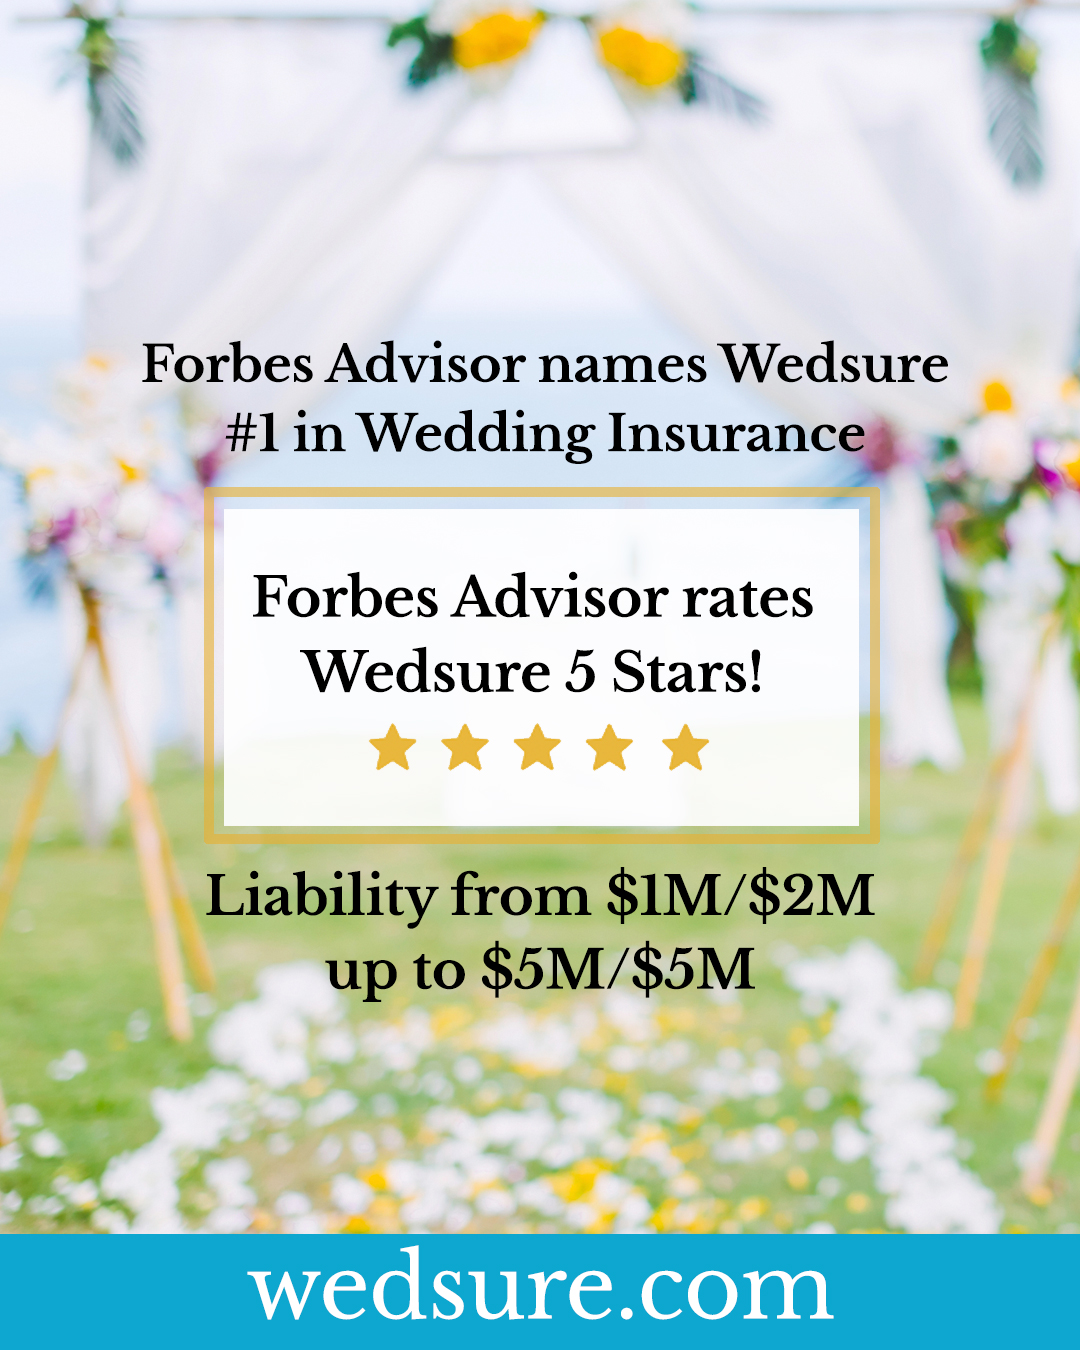 Rated #1 Wedding Insurance by Forbes Advisor